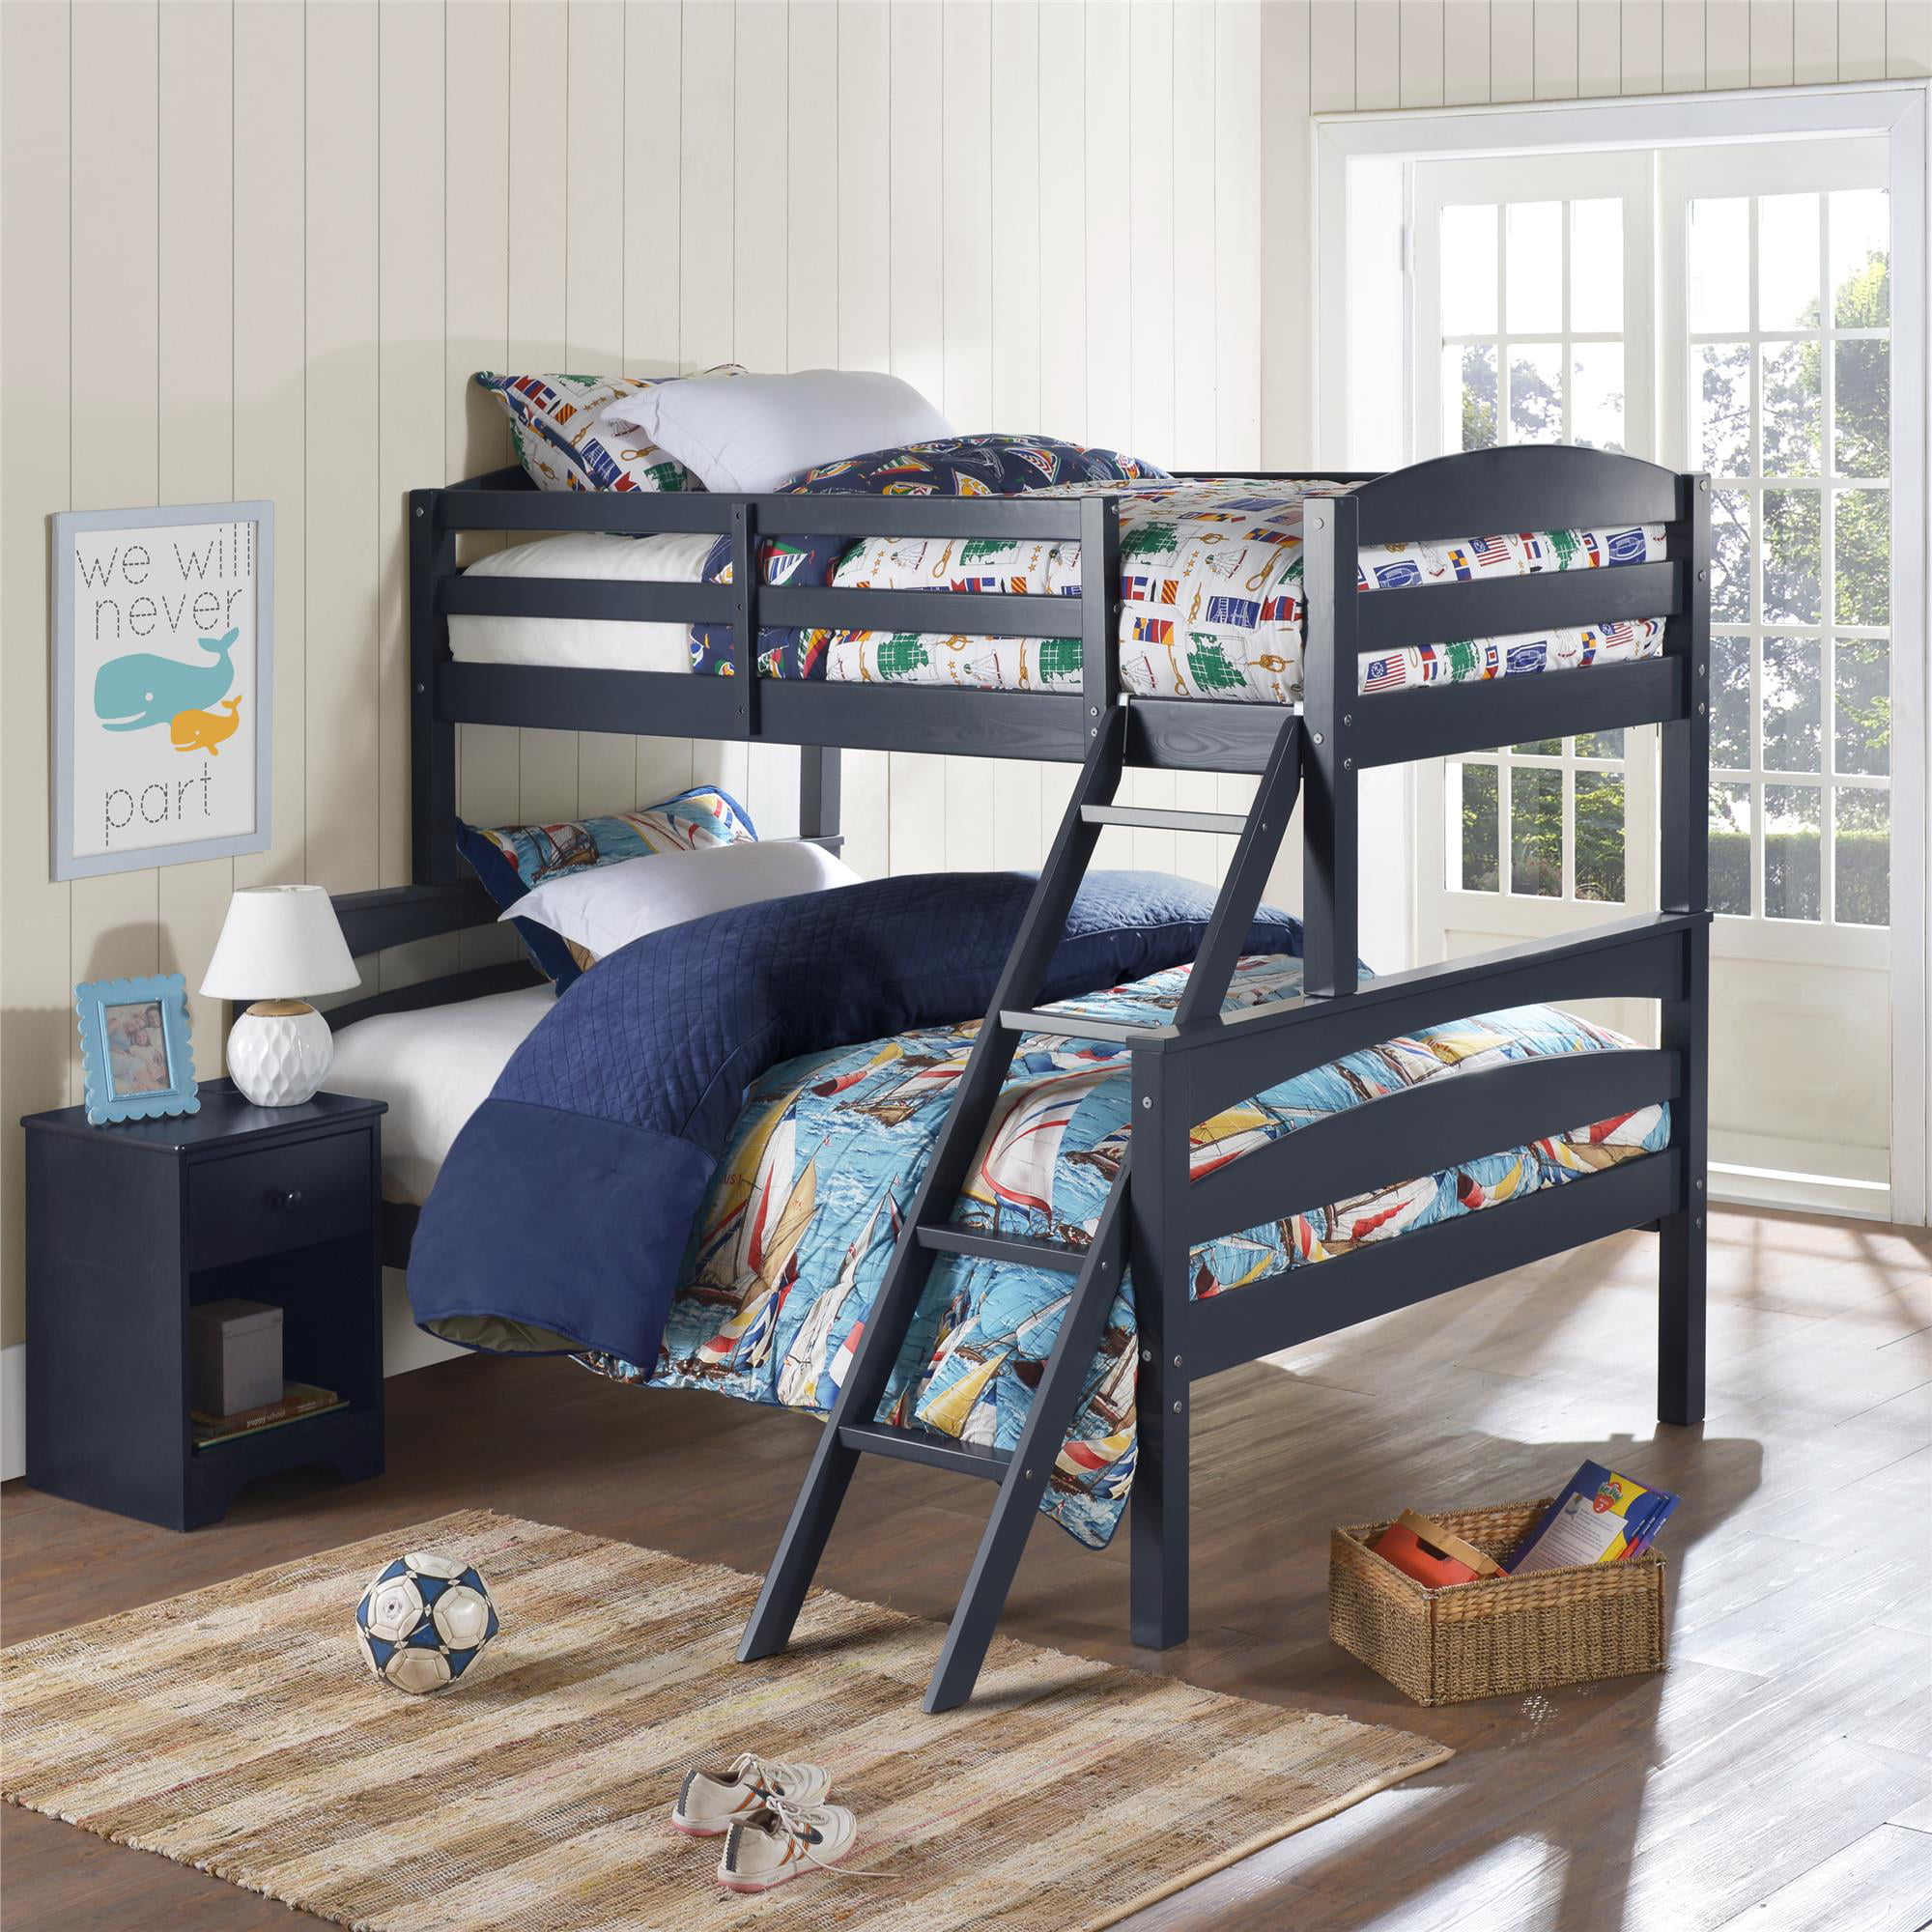 Better Homes Gardens Leighton Wood, Sears Bunk Beds Twin Over Full